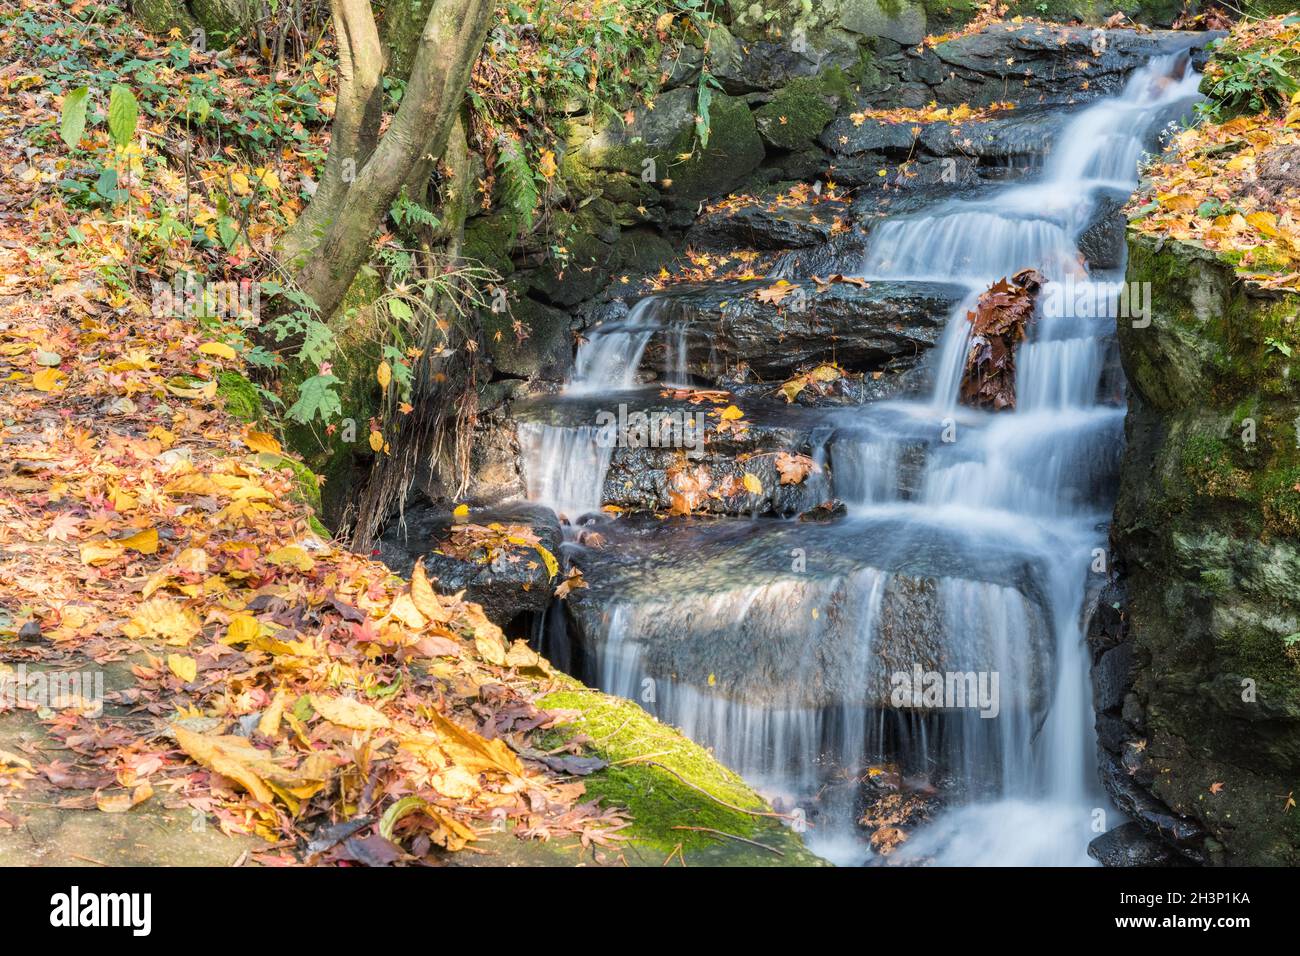 Stream and fallen leaves in autumn Stock Photo